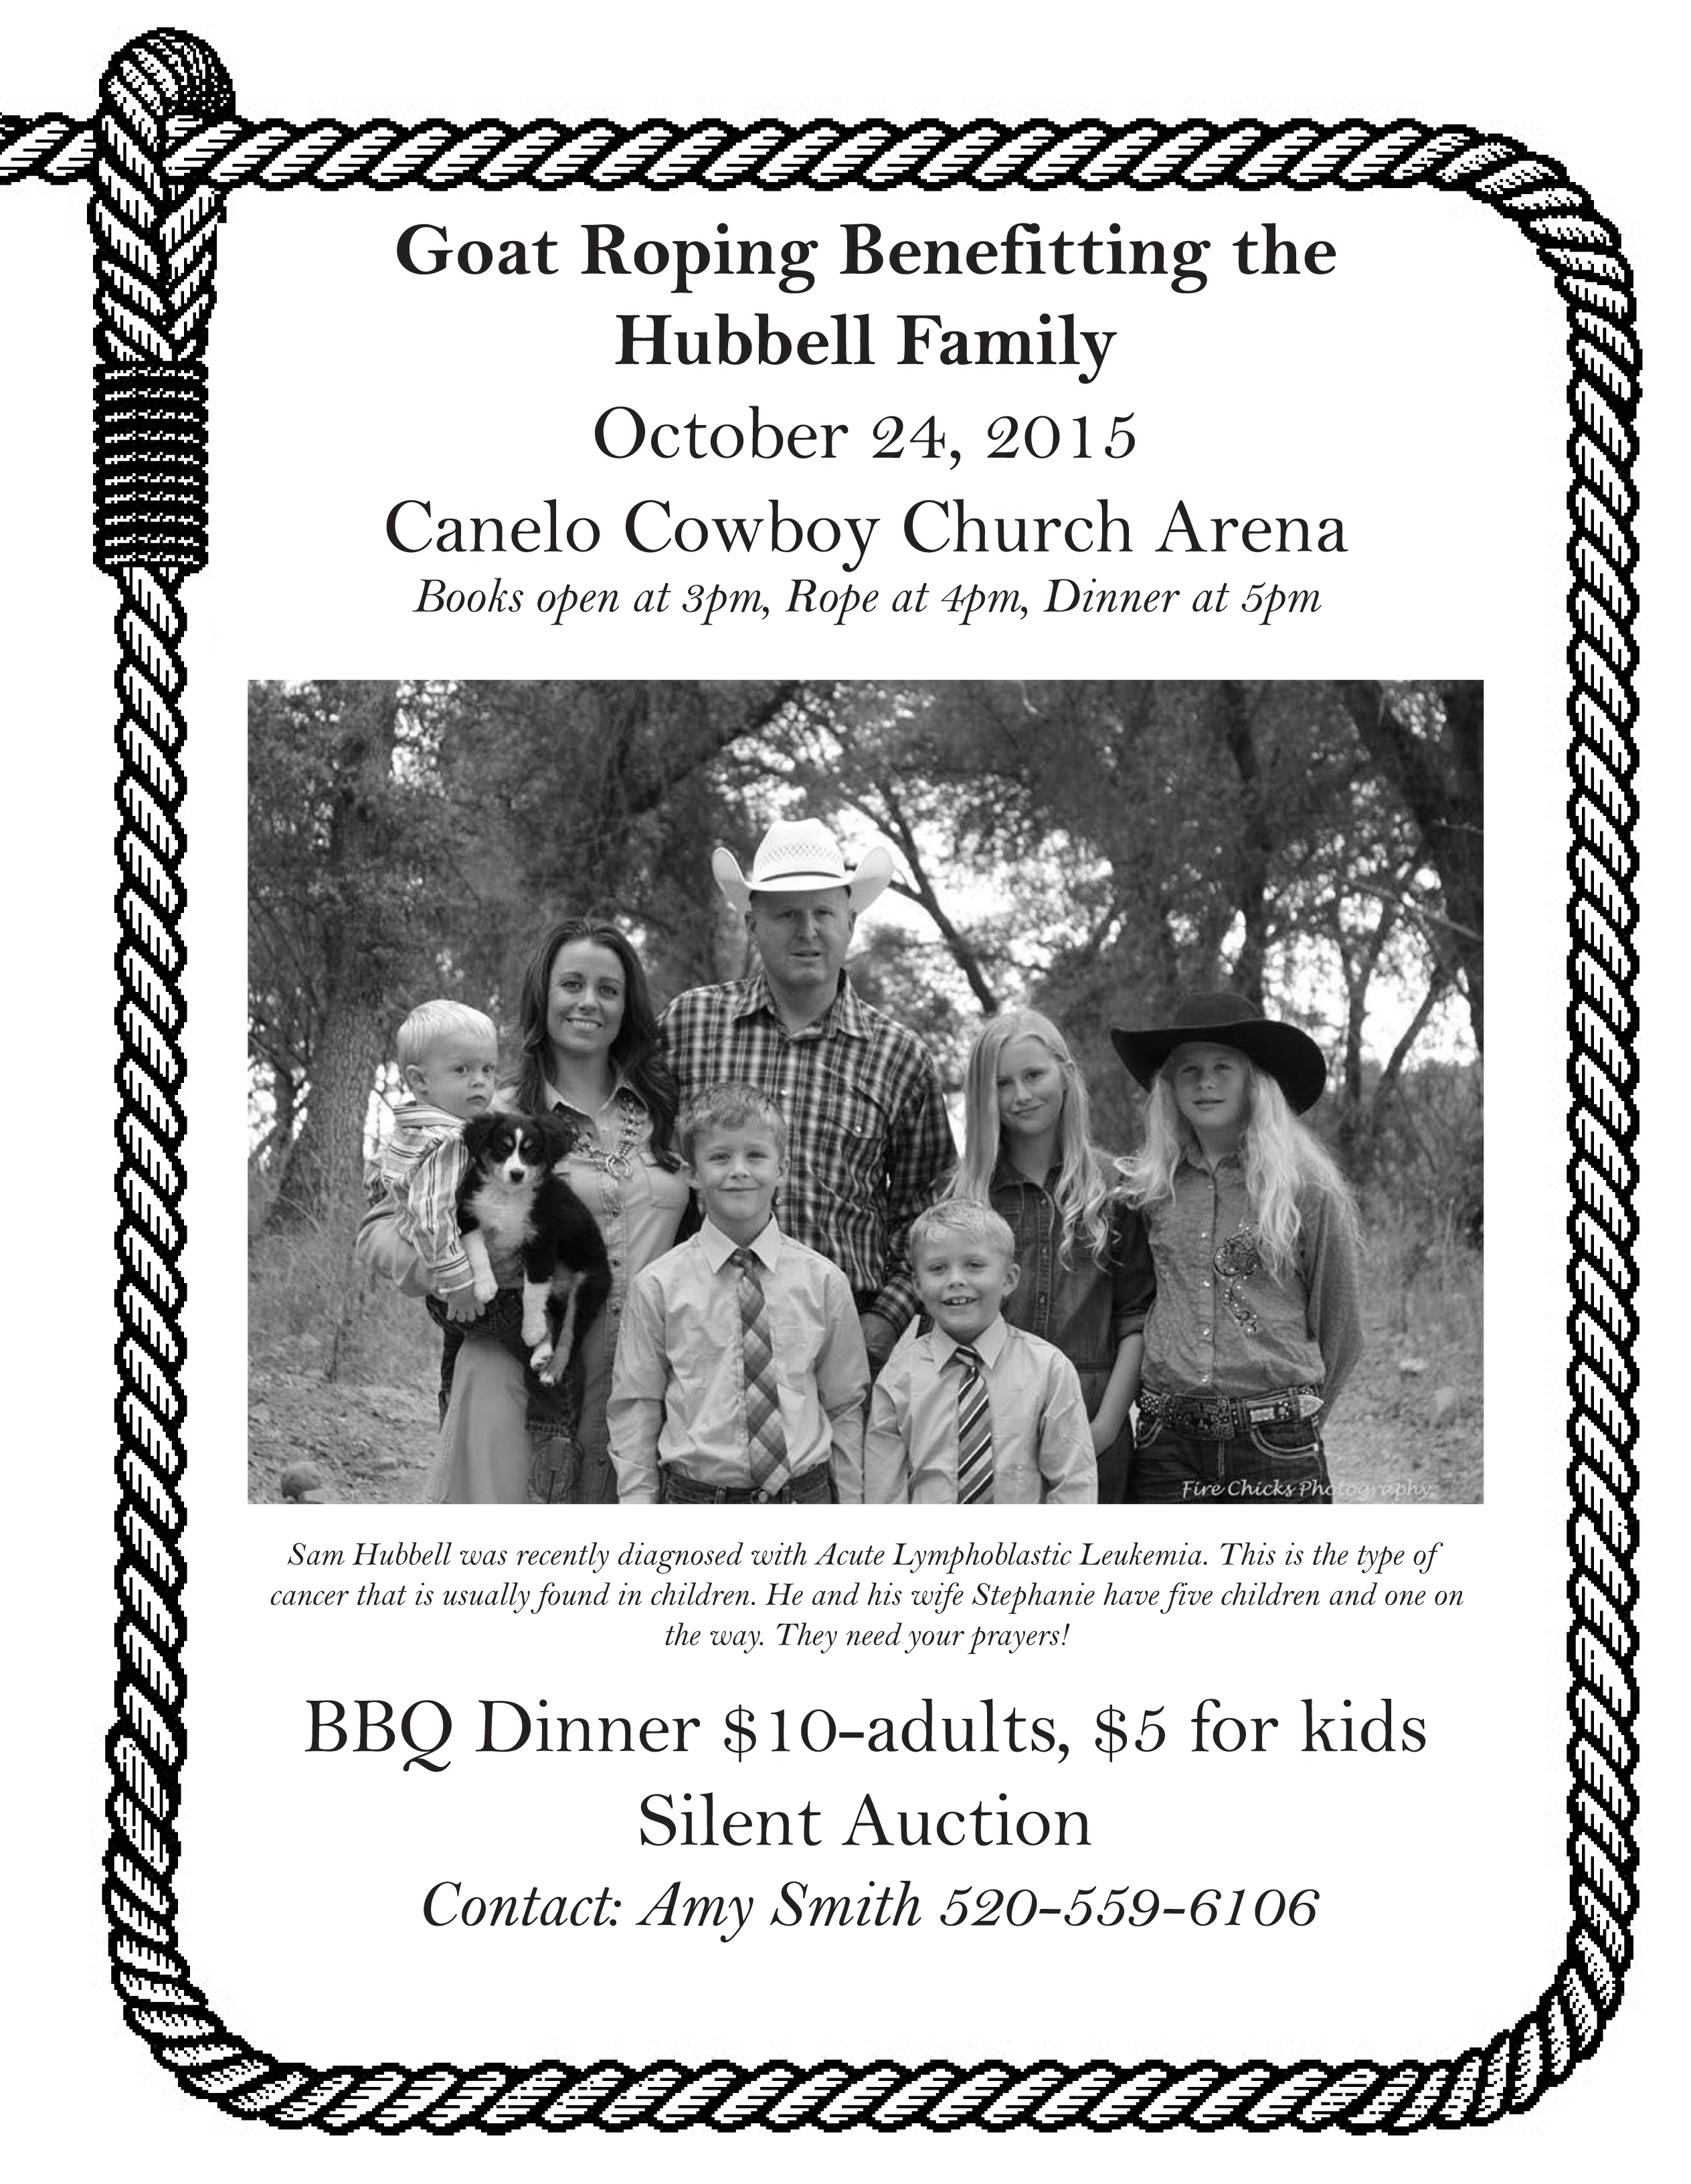 Hubbell Family Benefit